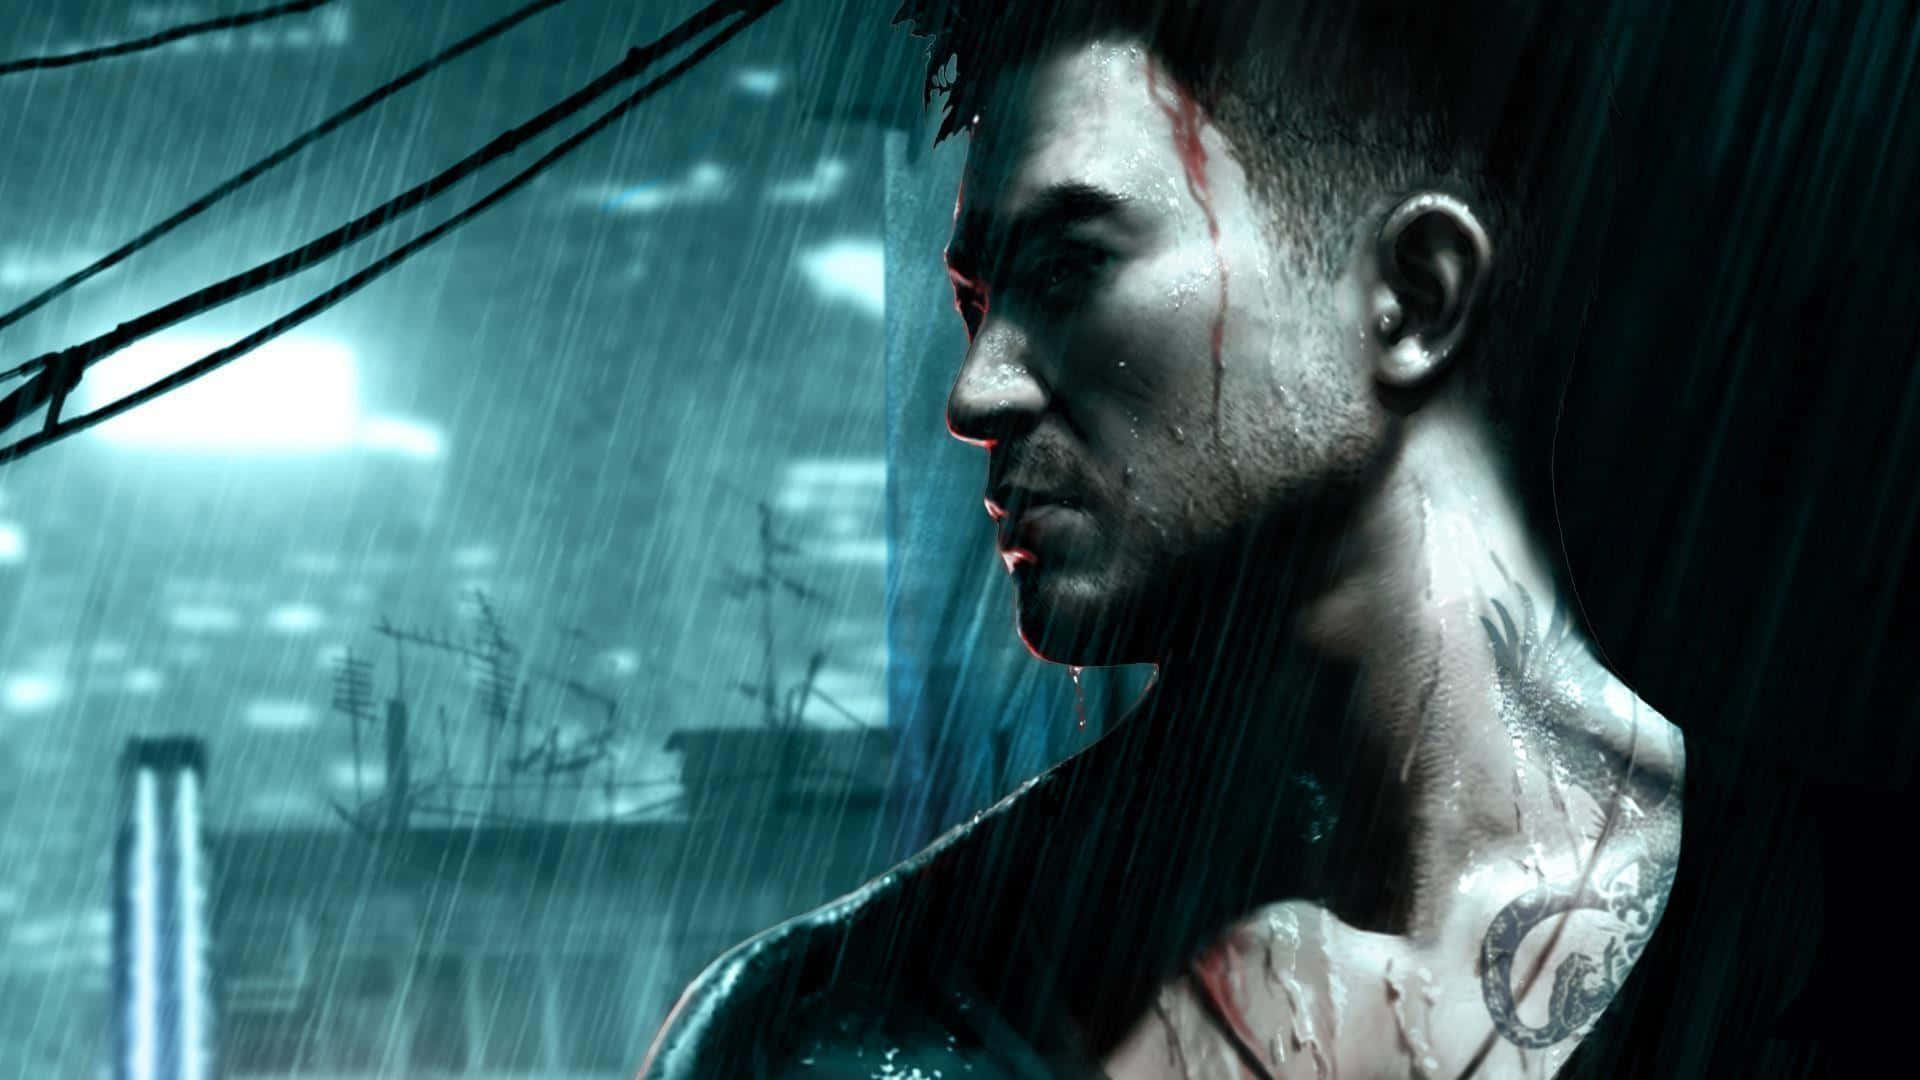 Uncover the secrets of Hong Kong in Sleeping Dogs